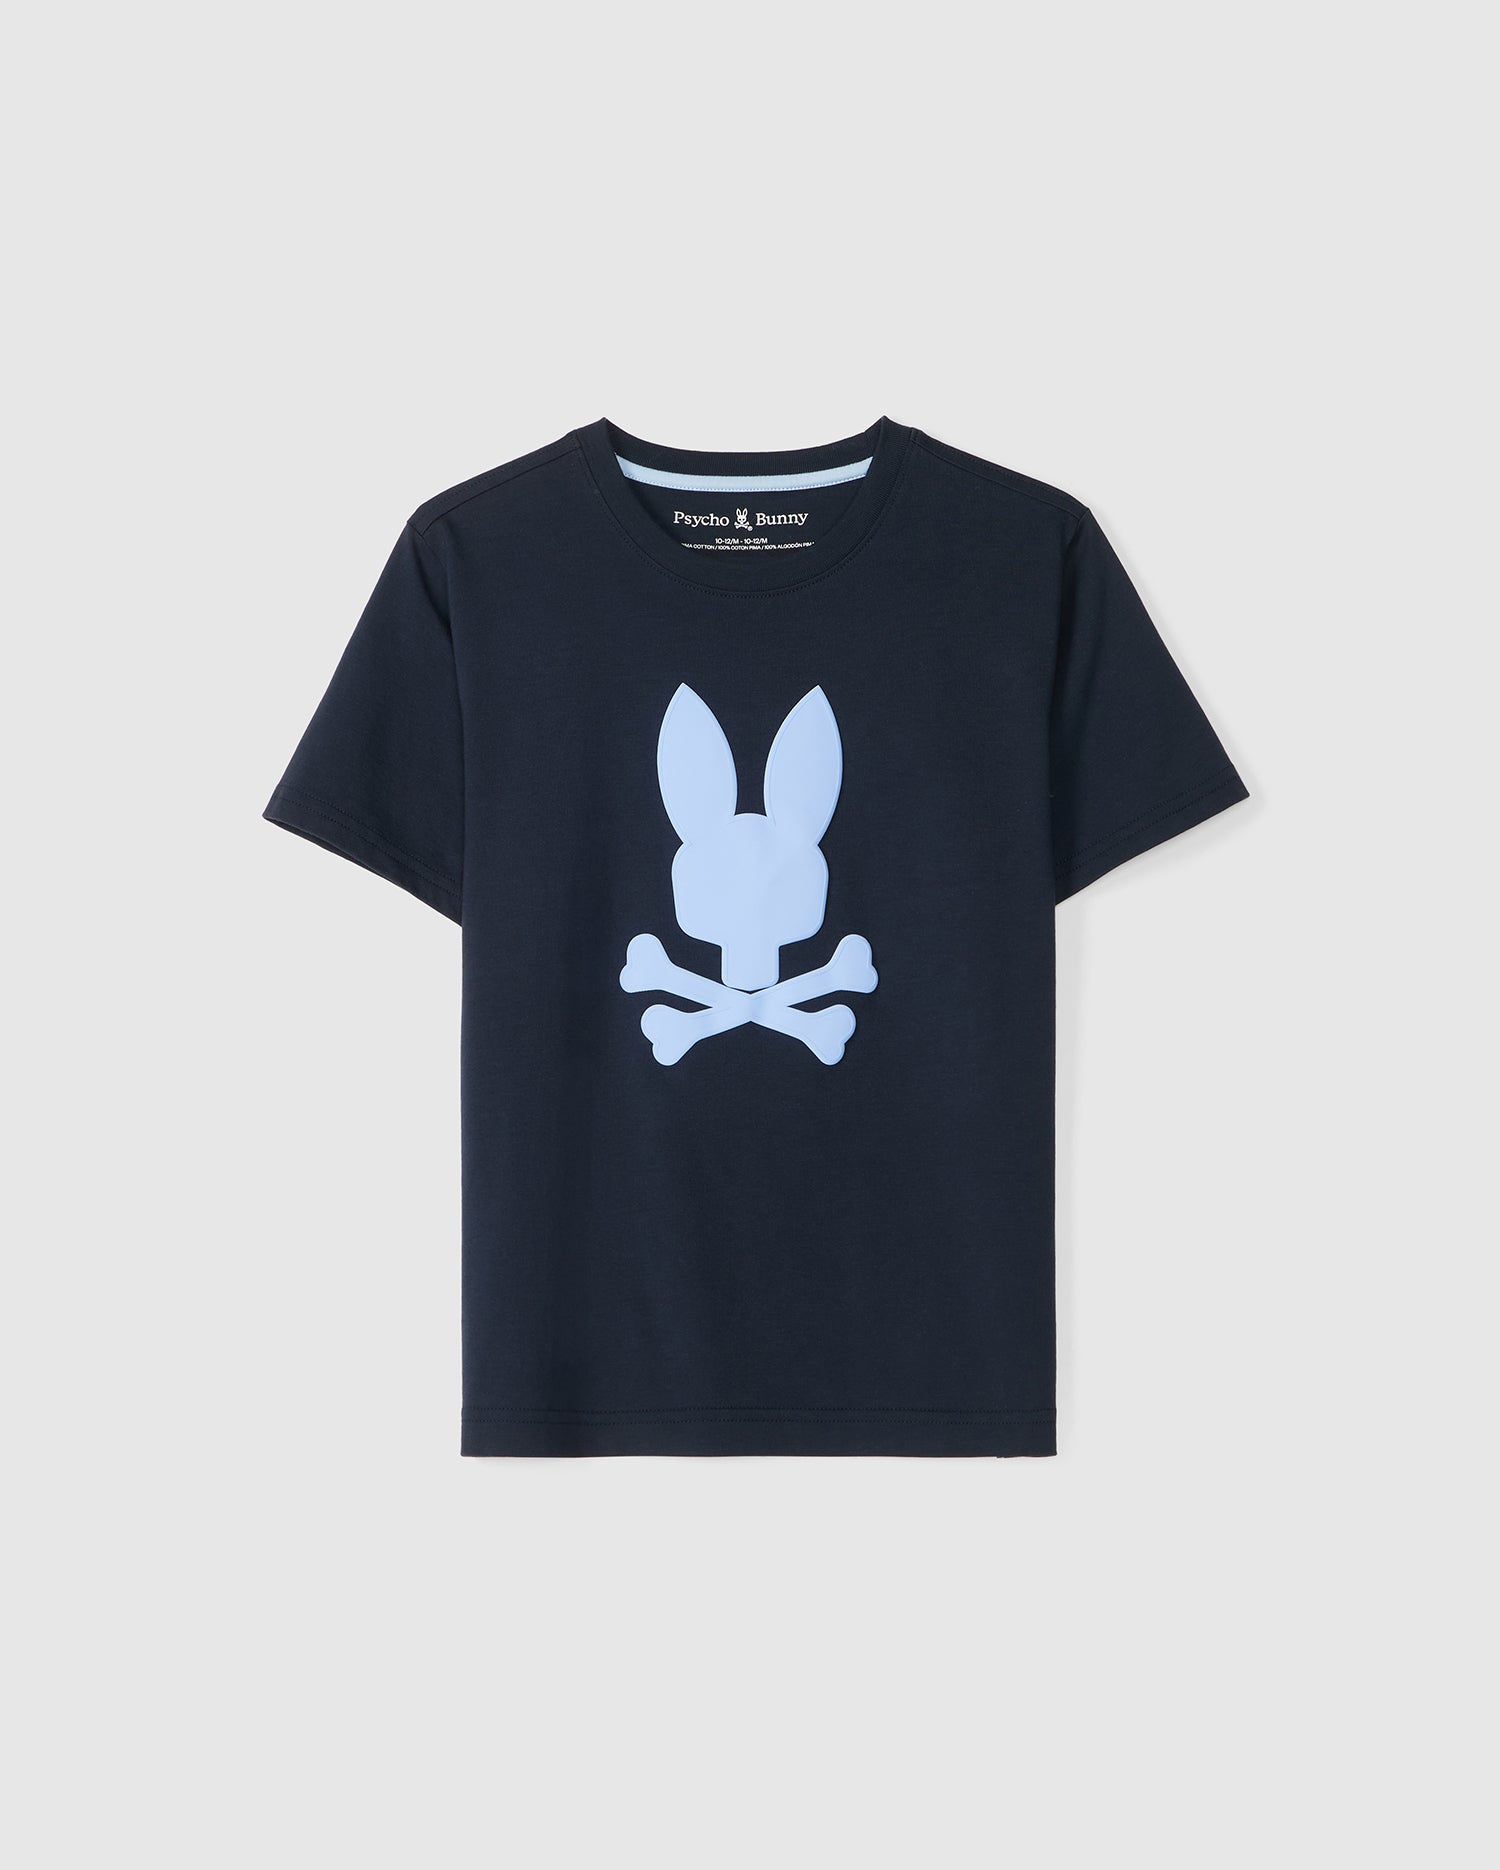 A dark blue embroidered KIDS HOUSTON GRAPHIC TEE - B0U607C200 with a white graphic of a skull and crossbones, where the skull is replaced by an outline of a bunny head. The t-shirt is displayed on a plain light background.